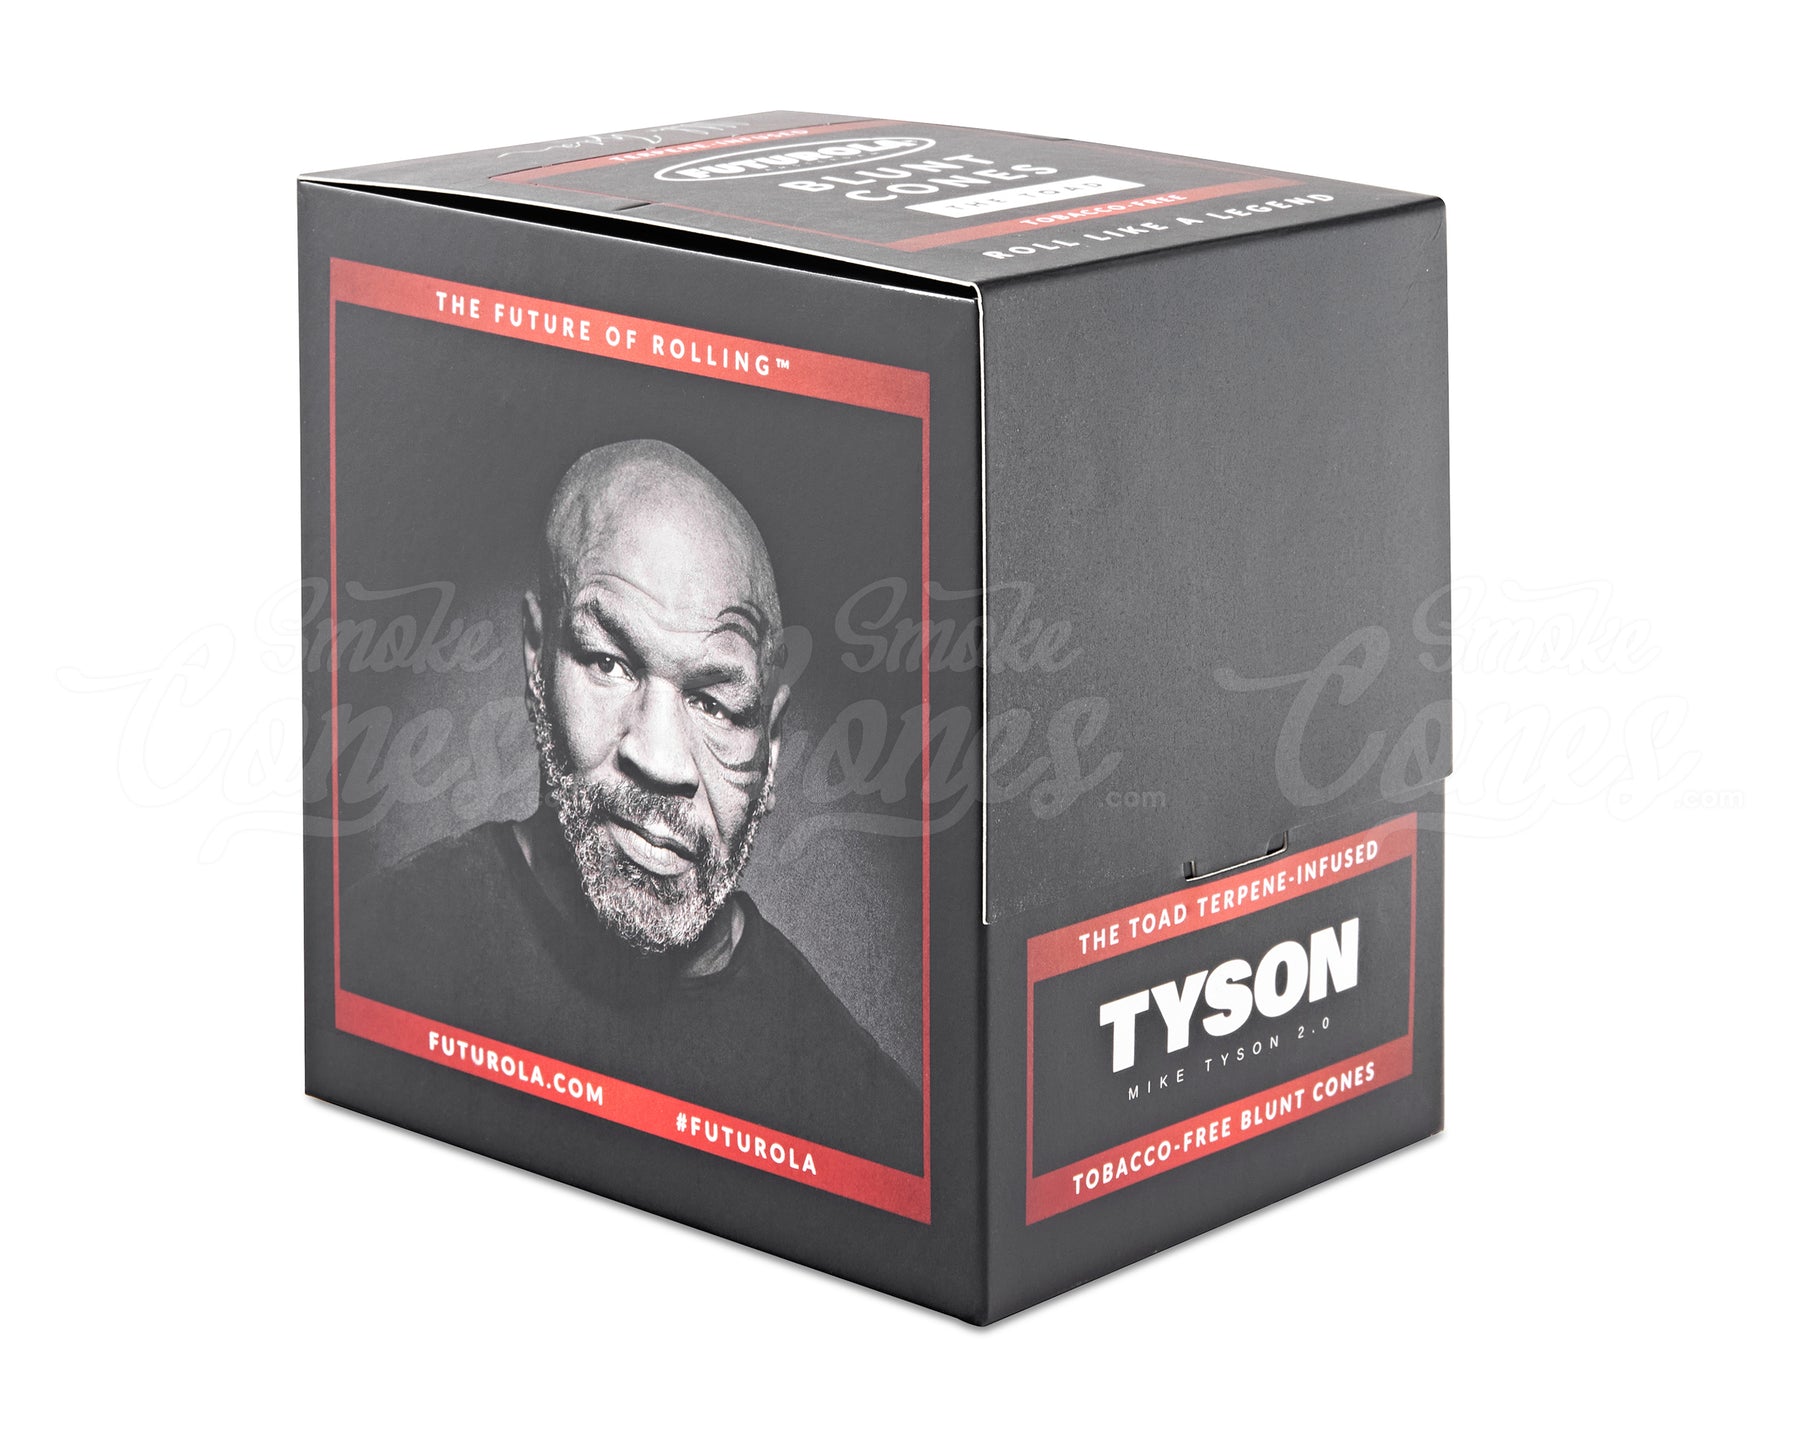 Futurola Tyson 2.0 "The Toad" 109mm King Size Terpene Infused Pre-Rolled Blunt Paper Cones 12/Box